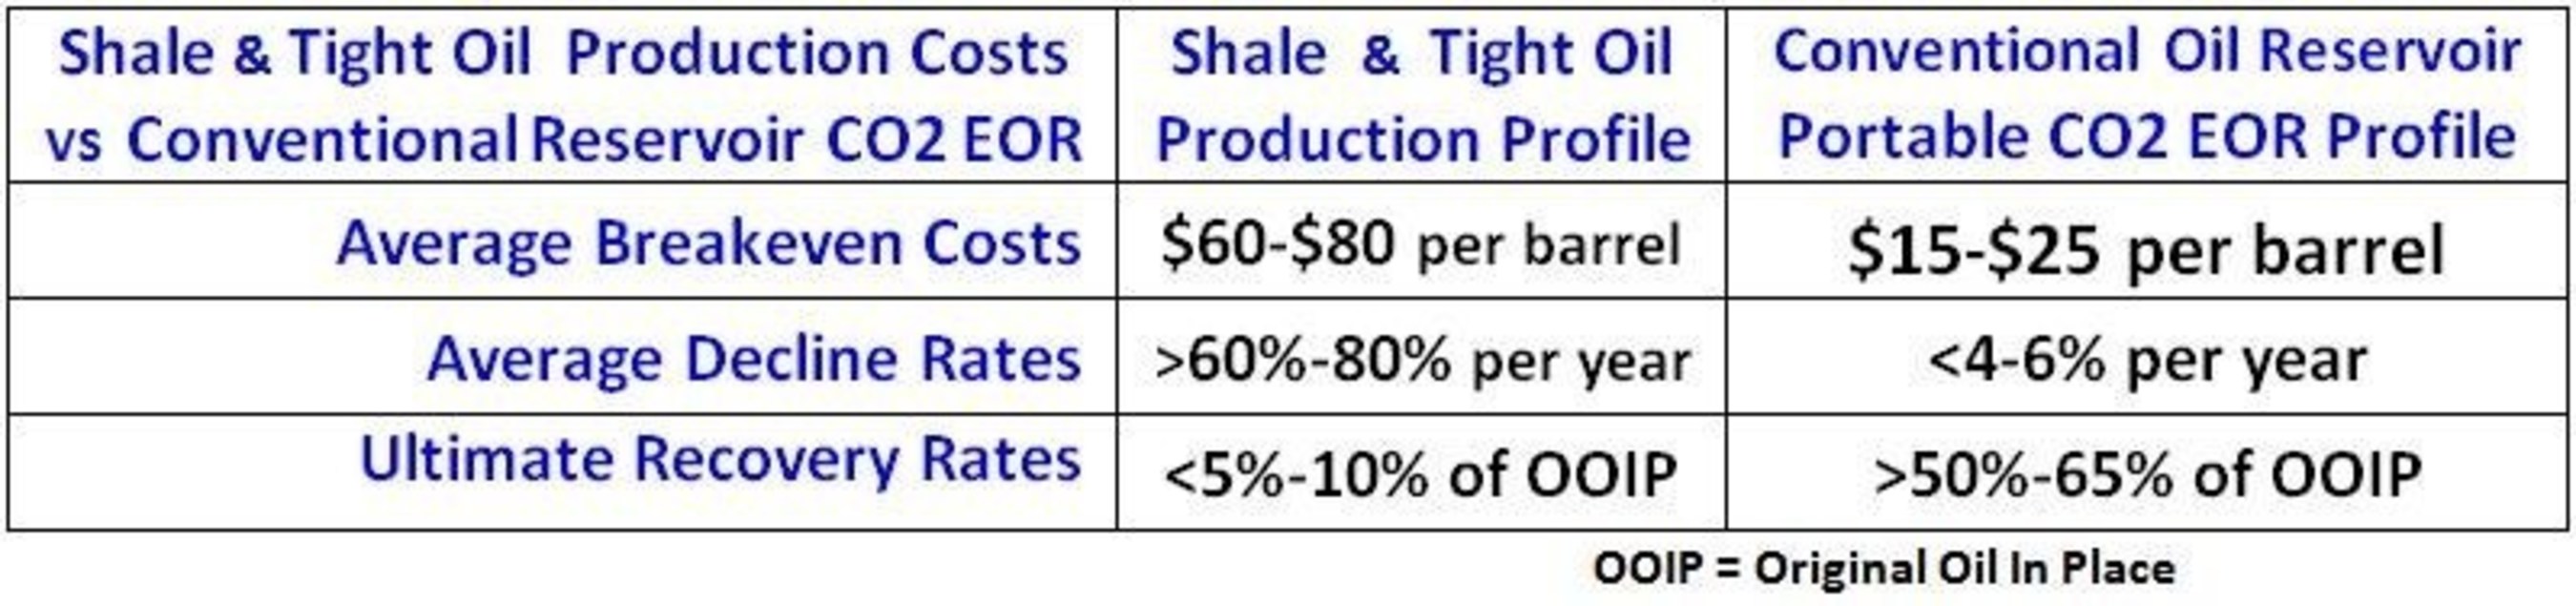 Low-Cost CO2 EOR Enhanced Oil Recovery in Conventional Oil Reservoir Economics Compared to High-Cost Shale Oil Production